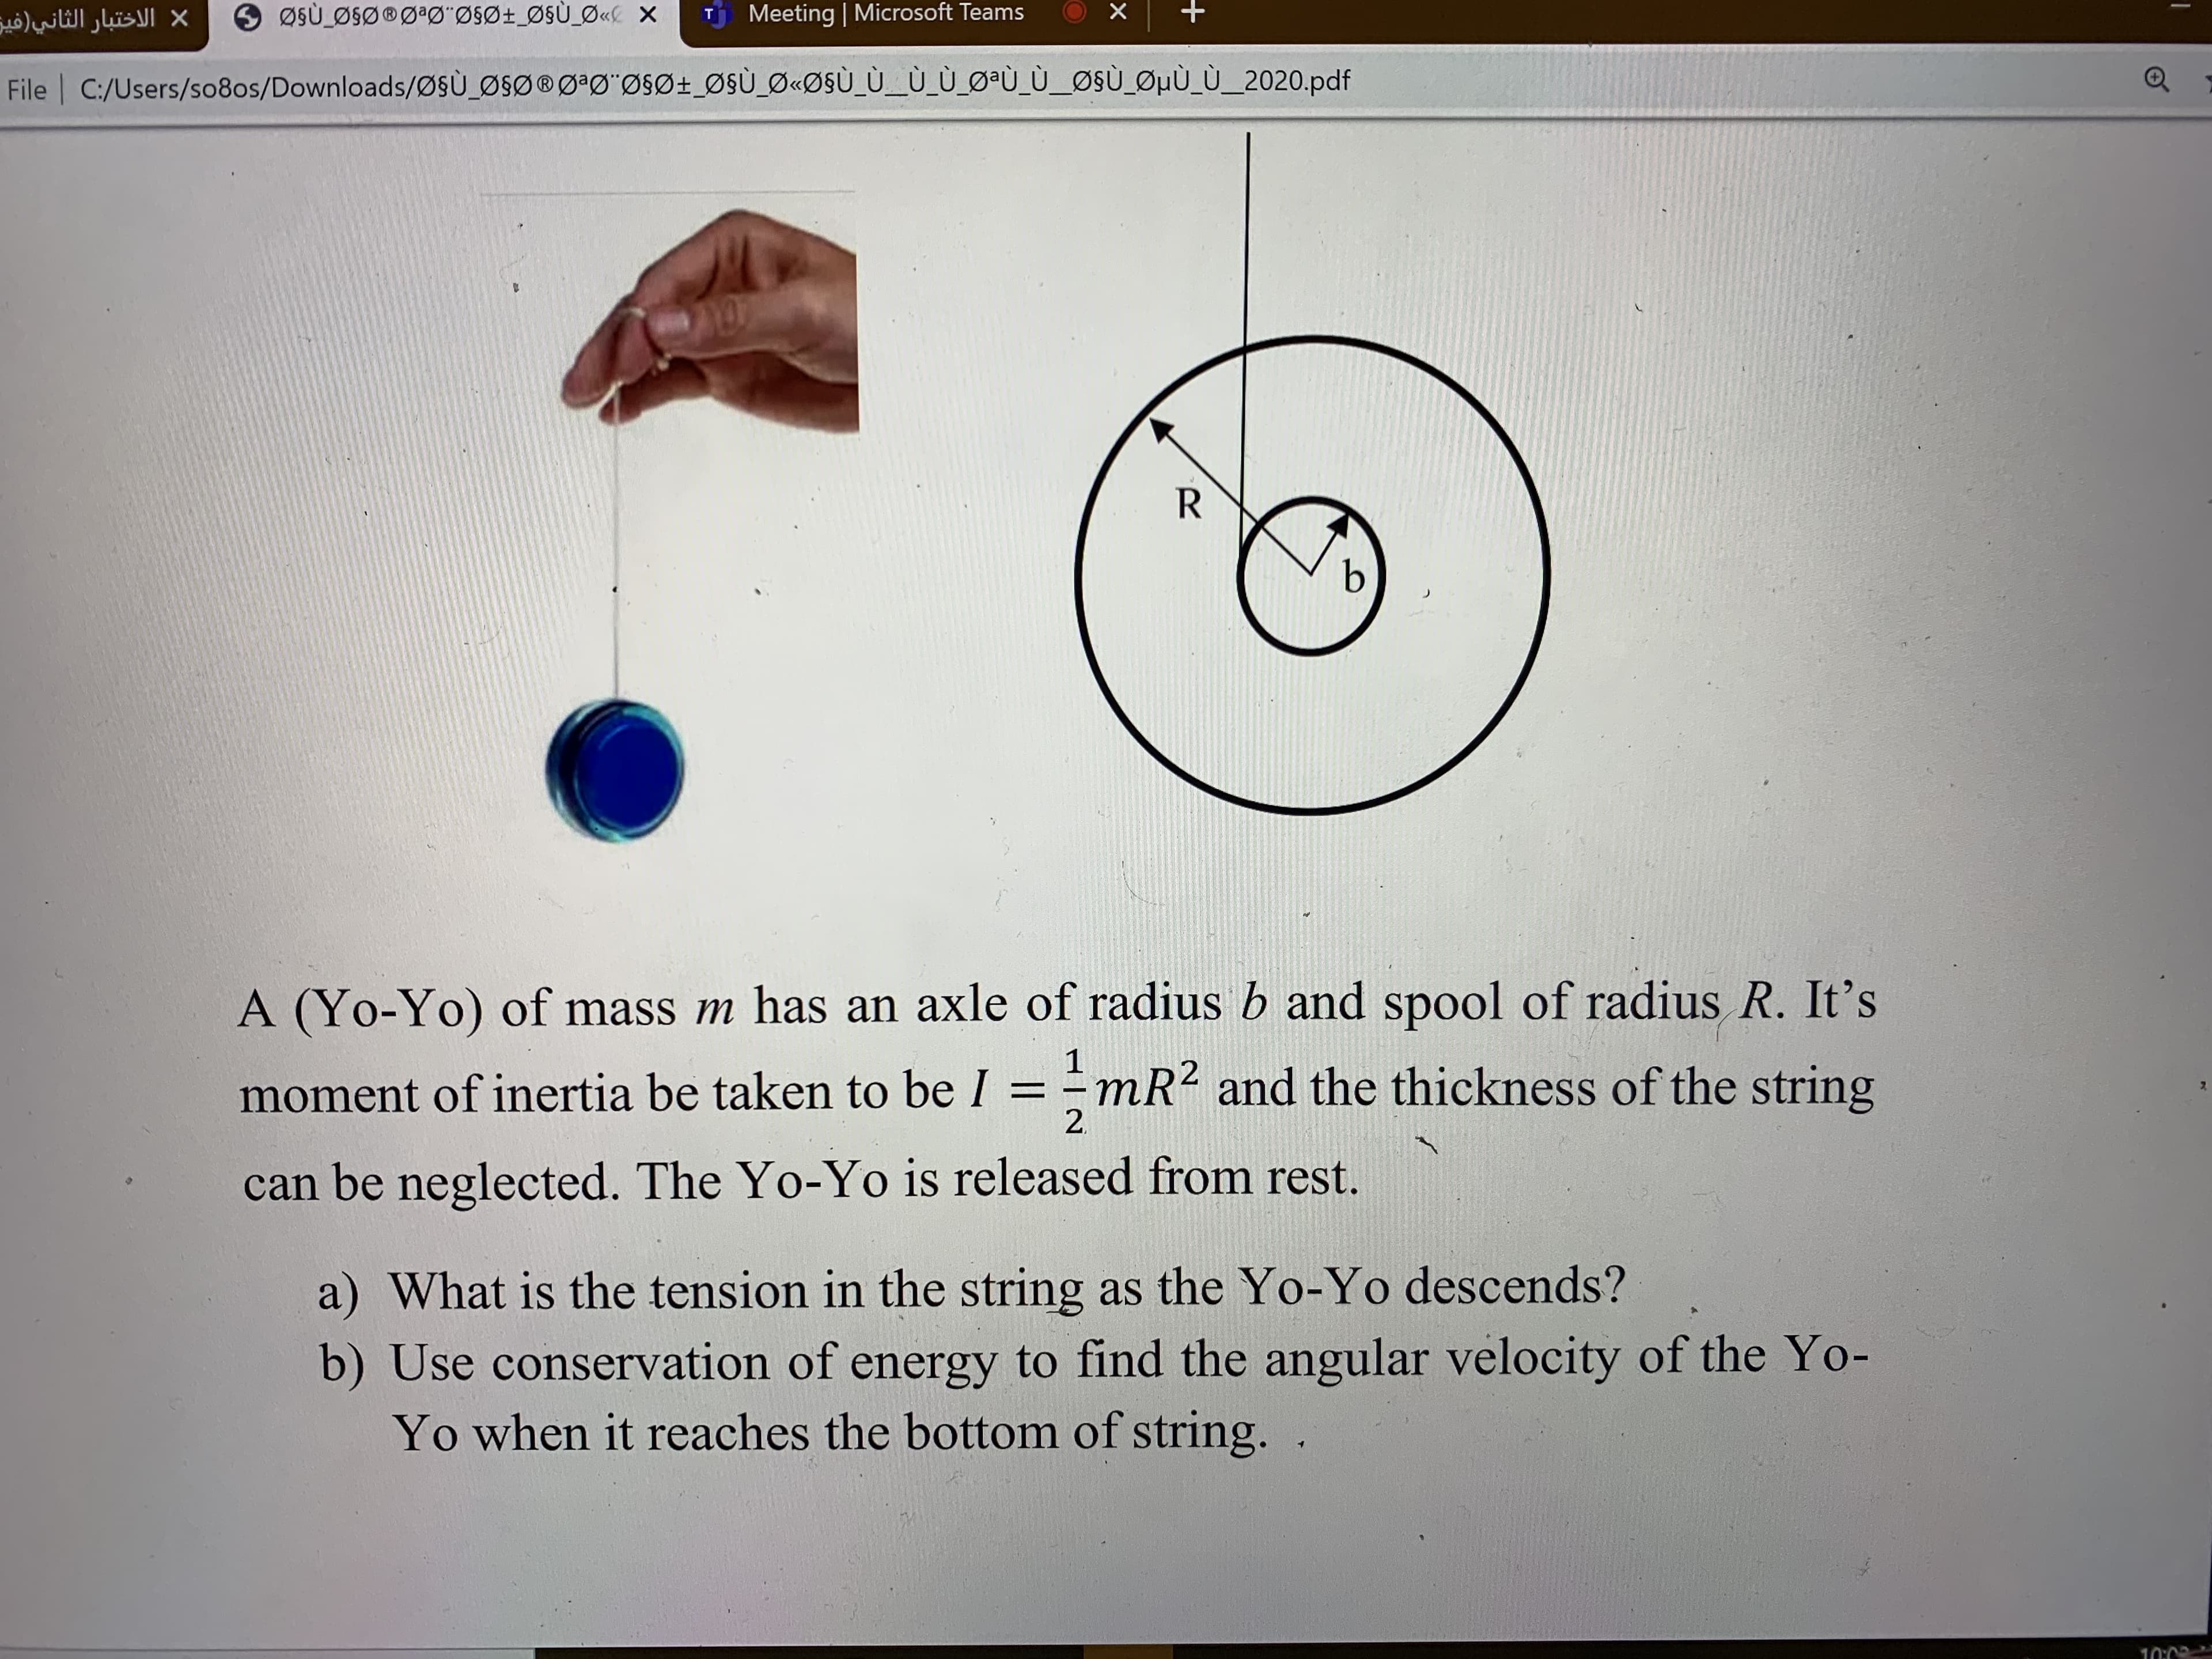 A (Yo-Yo) of mass m has an axle of radius b and spool of radius R. It's
1
moment of inertia be taken to be I = mR? and the thickness of the string
%3D
2.
